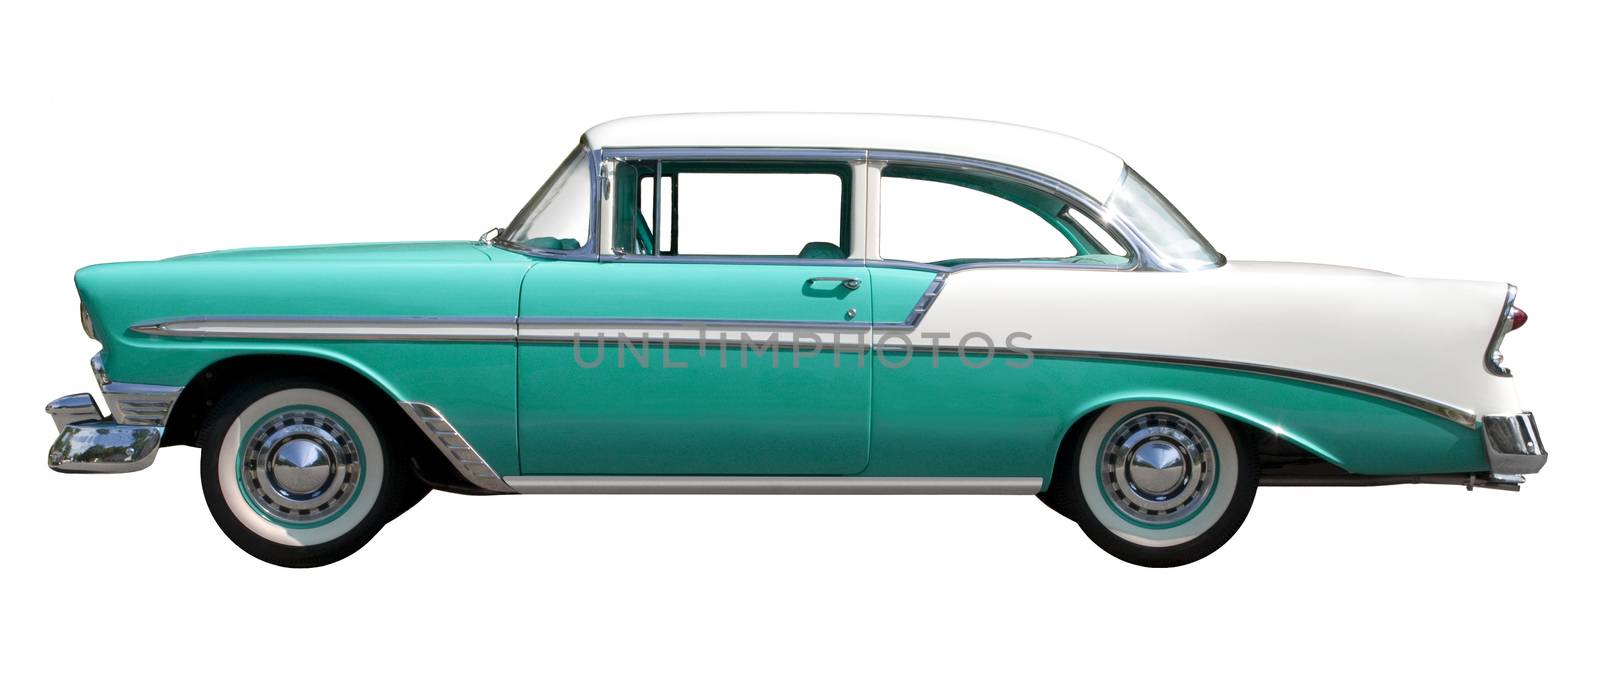 Green Bel-Air Vintage Automobile against White Background by Balefire9